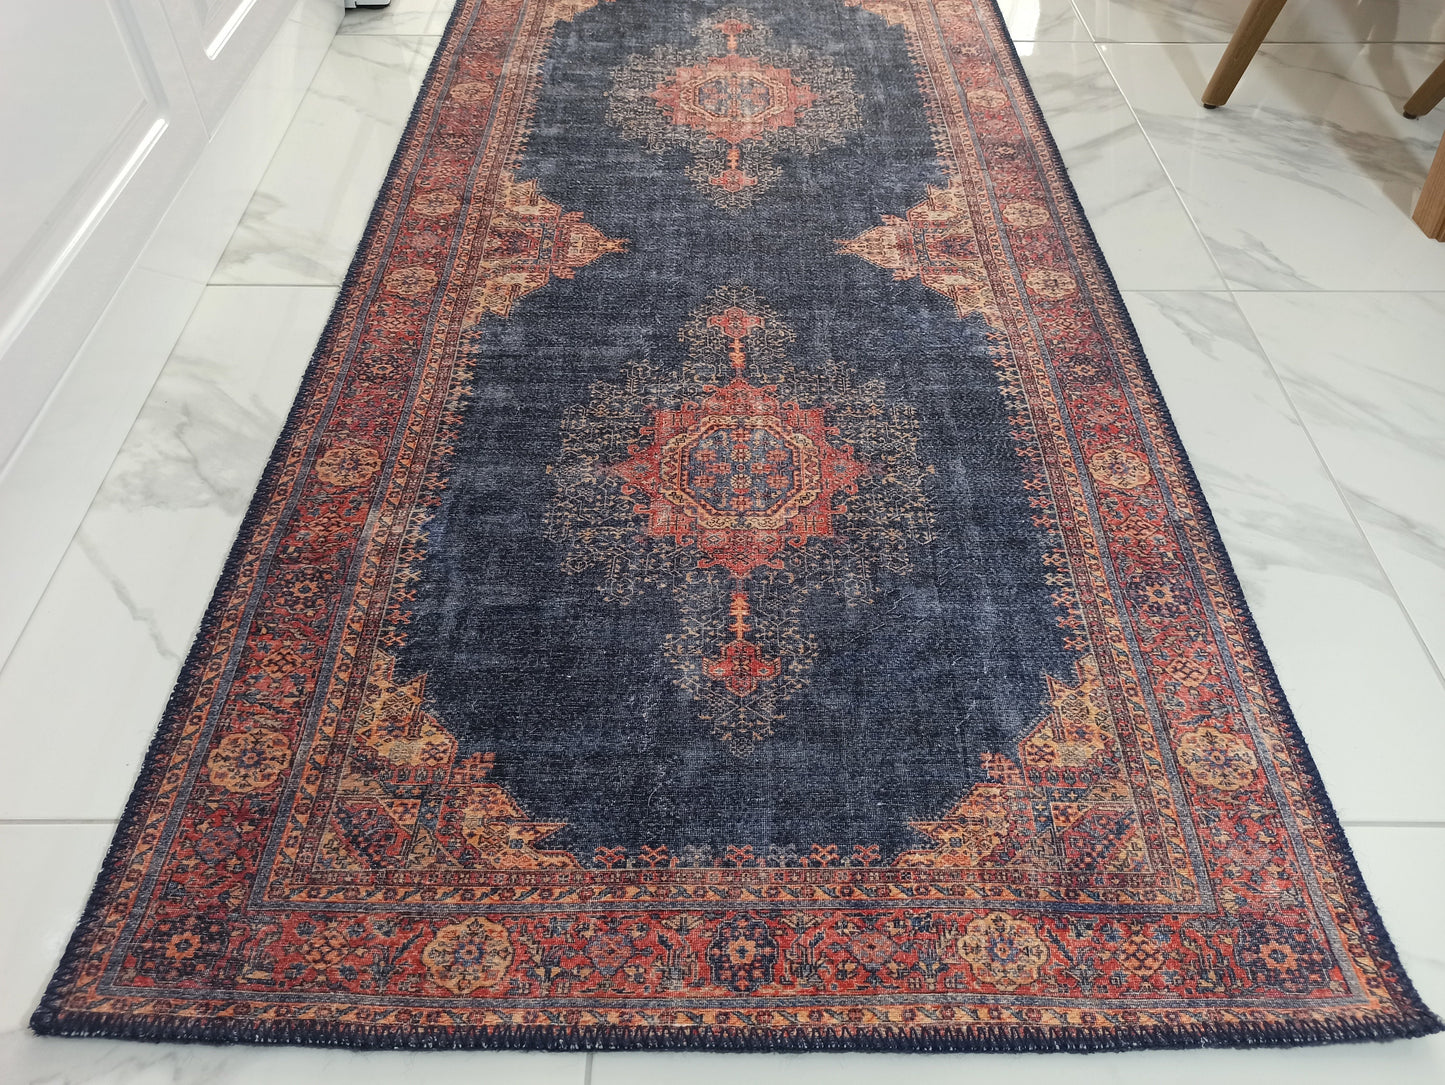 NARGAN Runner | Persian Pattern Oriental Rug, Antique Hand-knotted look, Home decor, Traditional, Art deco Runners, Navy blue, Red, Rugs